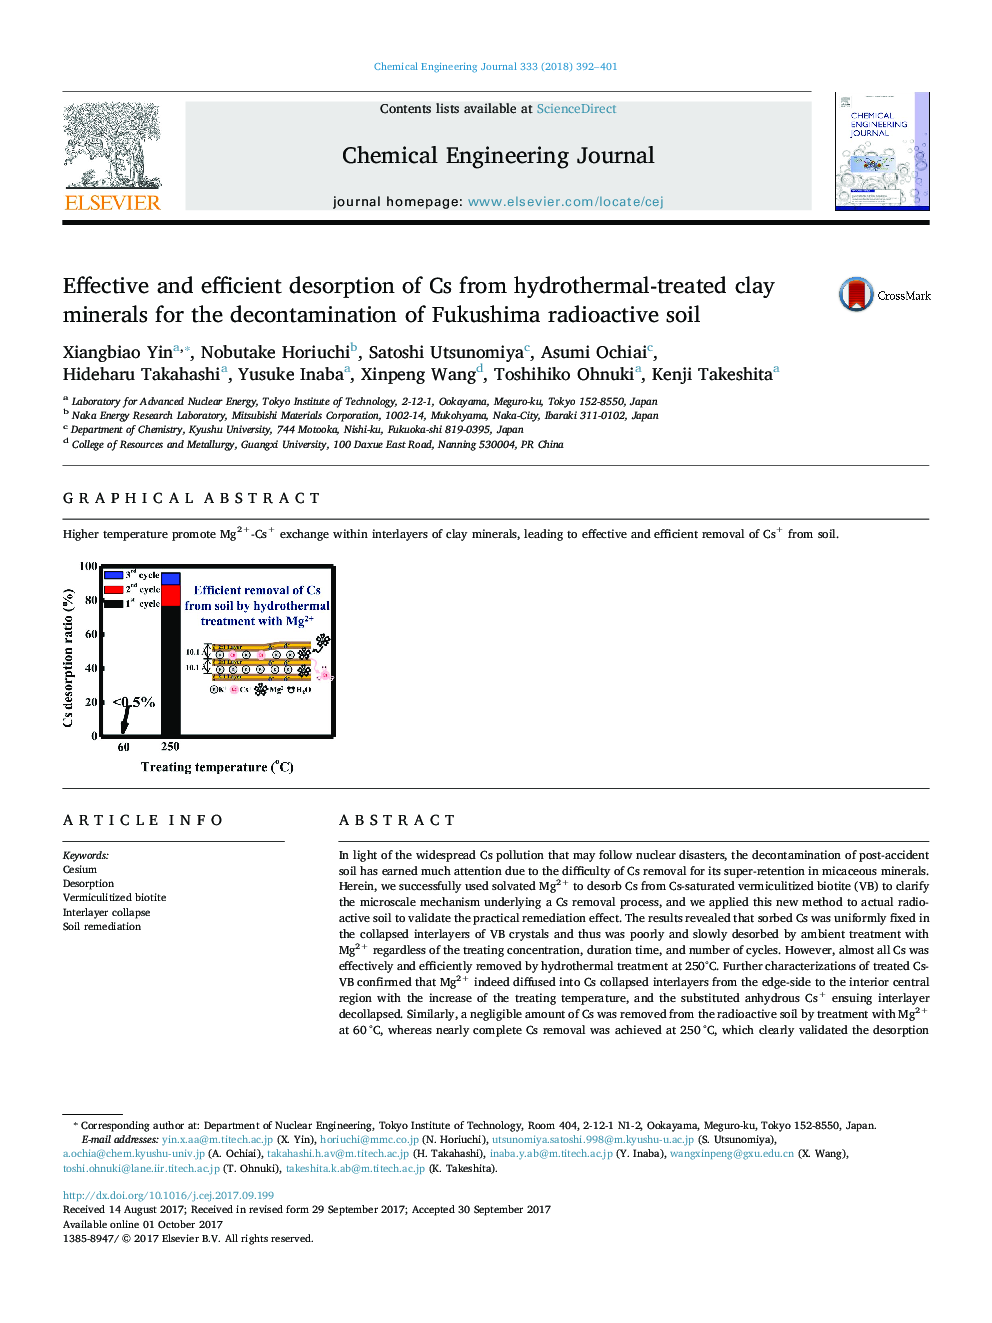 Effective and efficient desorption of Cs from hydrothermal-treated clay minerals for the decontamination of Fukushima radioactive soil